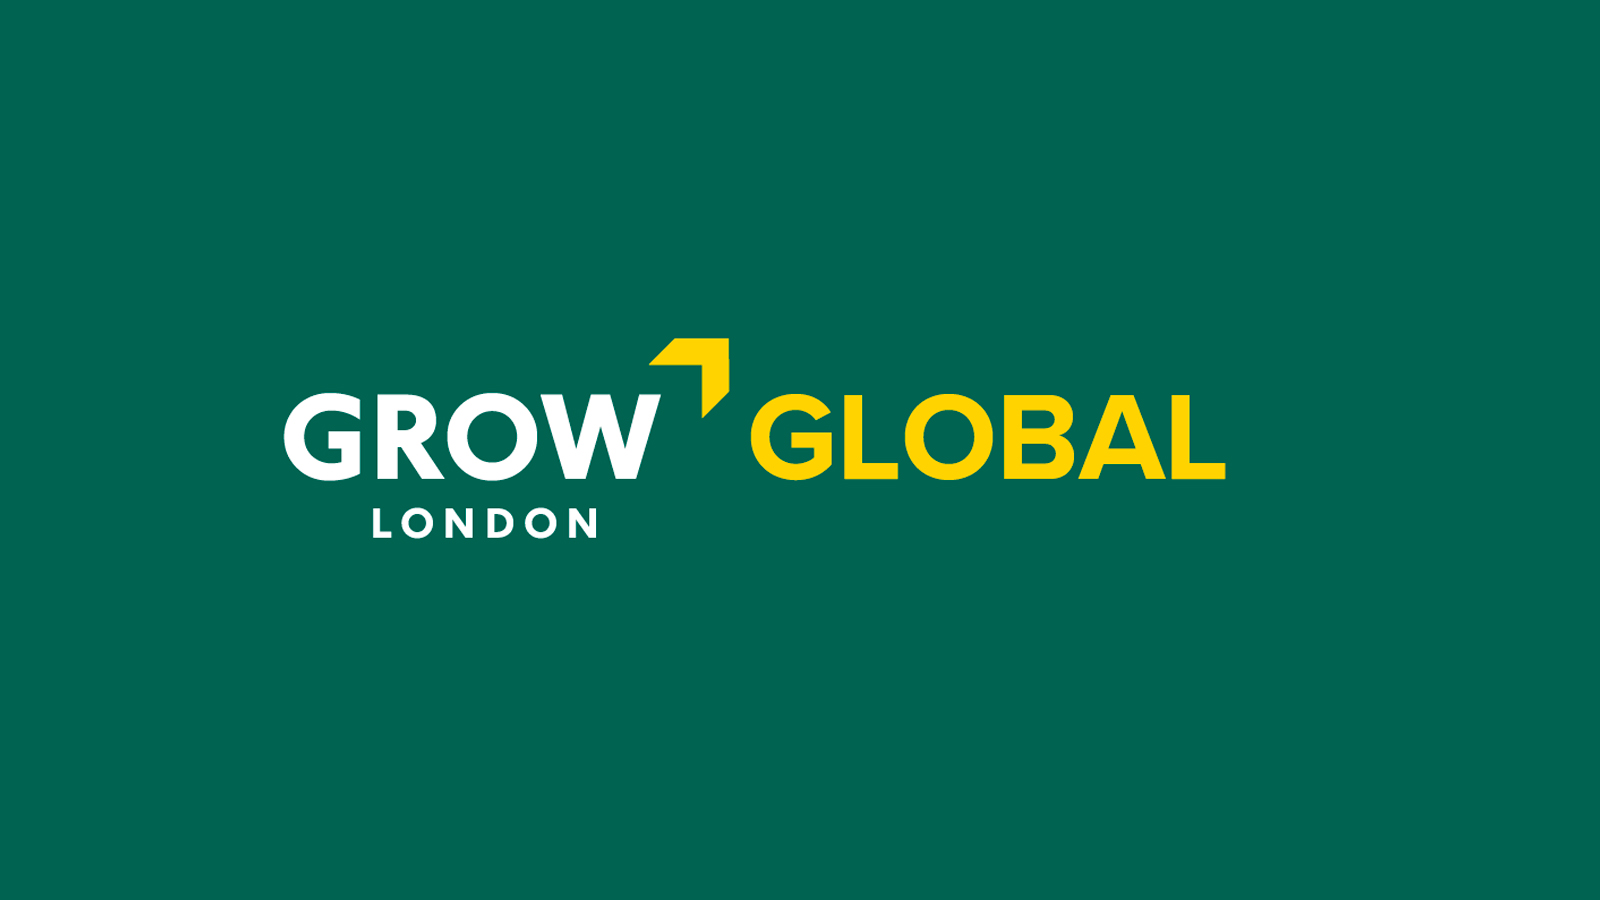 Eagle Eye Selected to Join Cohort 1 of the London & Partners Grow London Global Programme